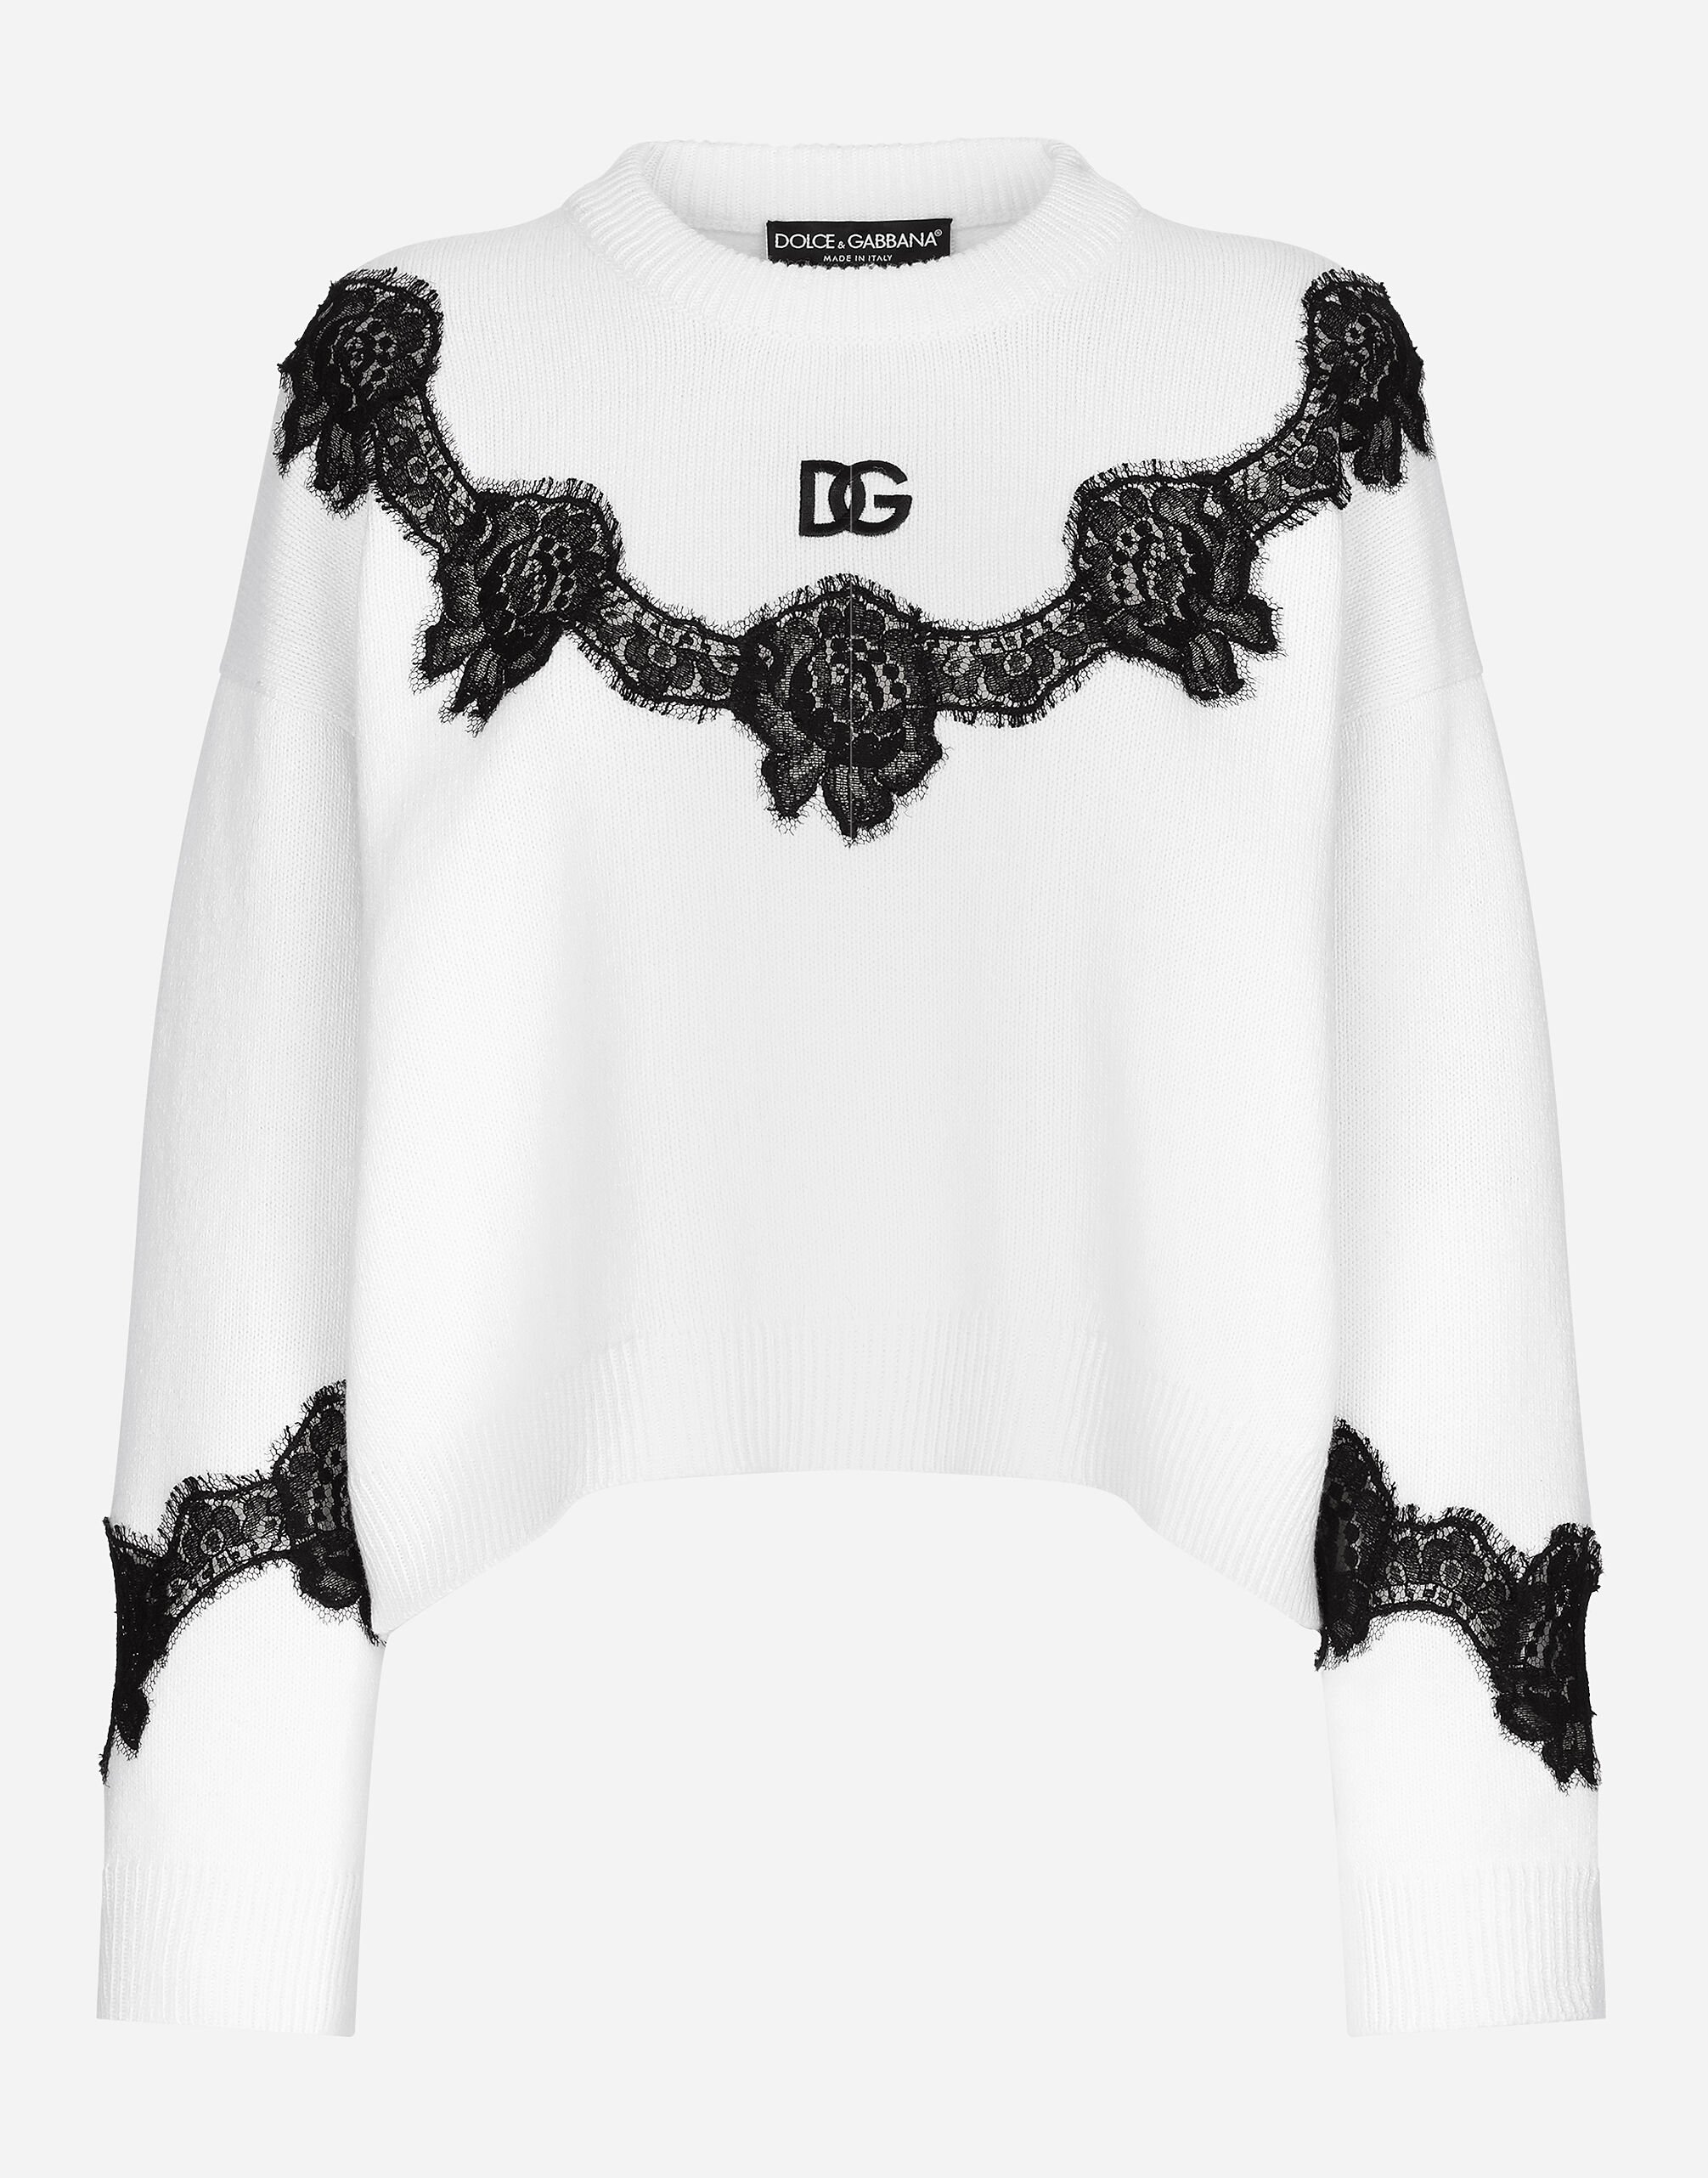 Dolce & Gabbana Wool sweater with DG logo and lace inserts Print FXV08TJCVS2